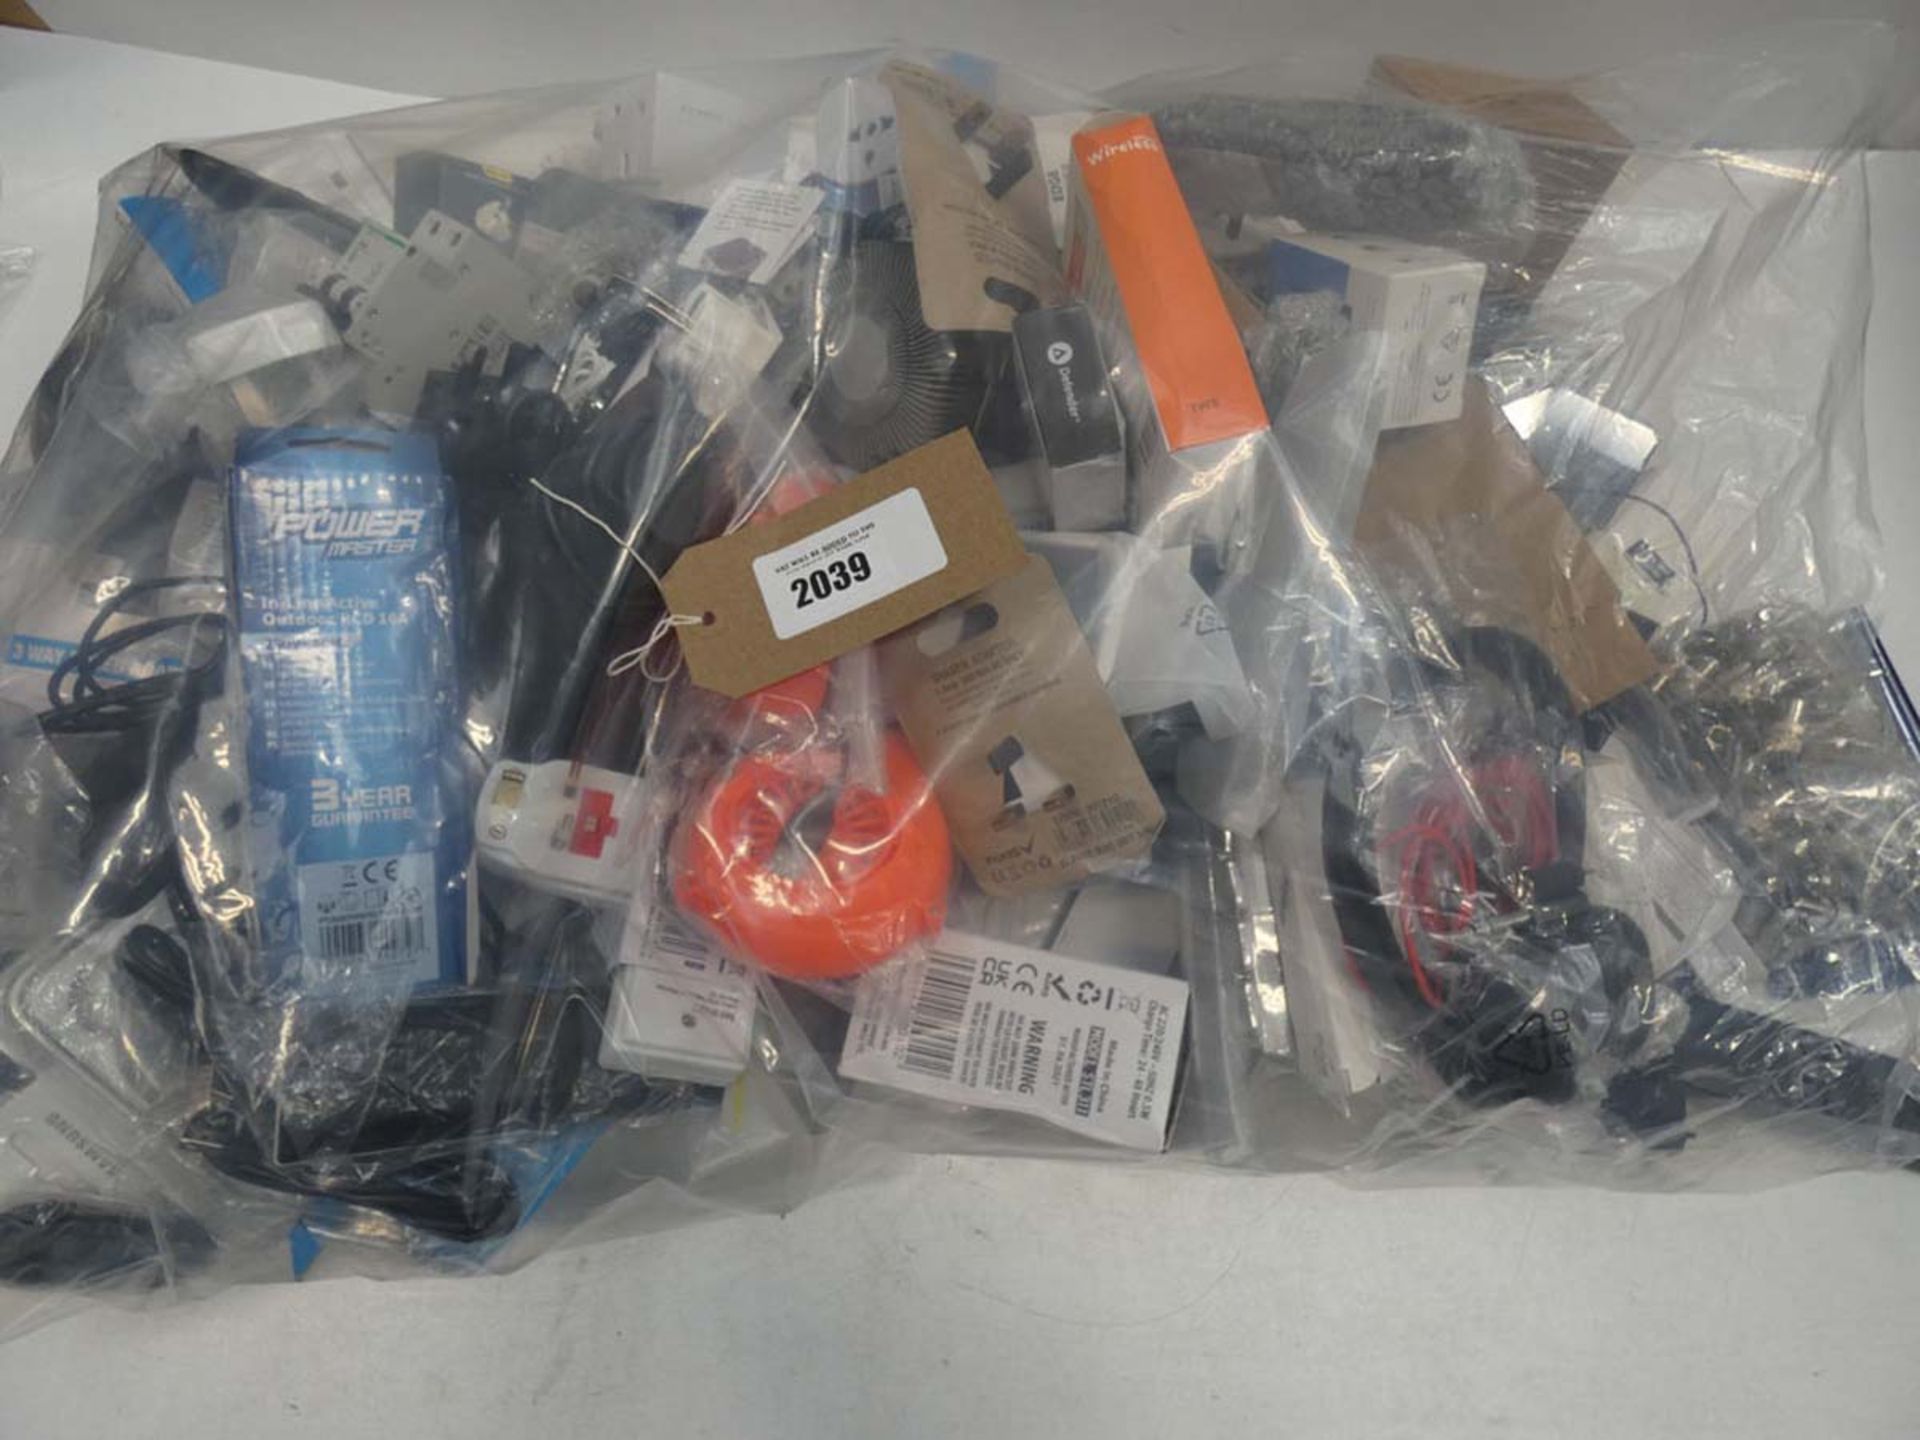 Bag containing quantity of electrical related accessories and devices; adapters, sockets, mp3